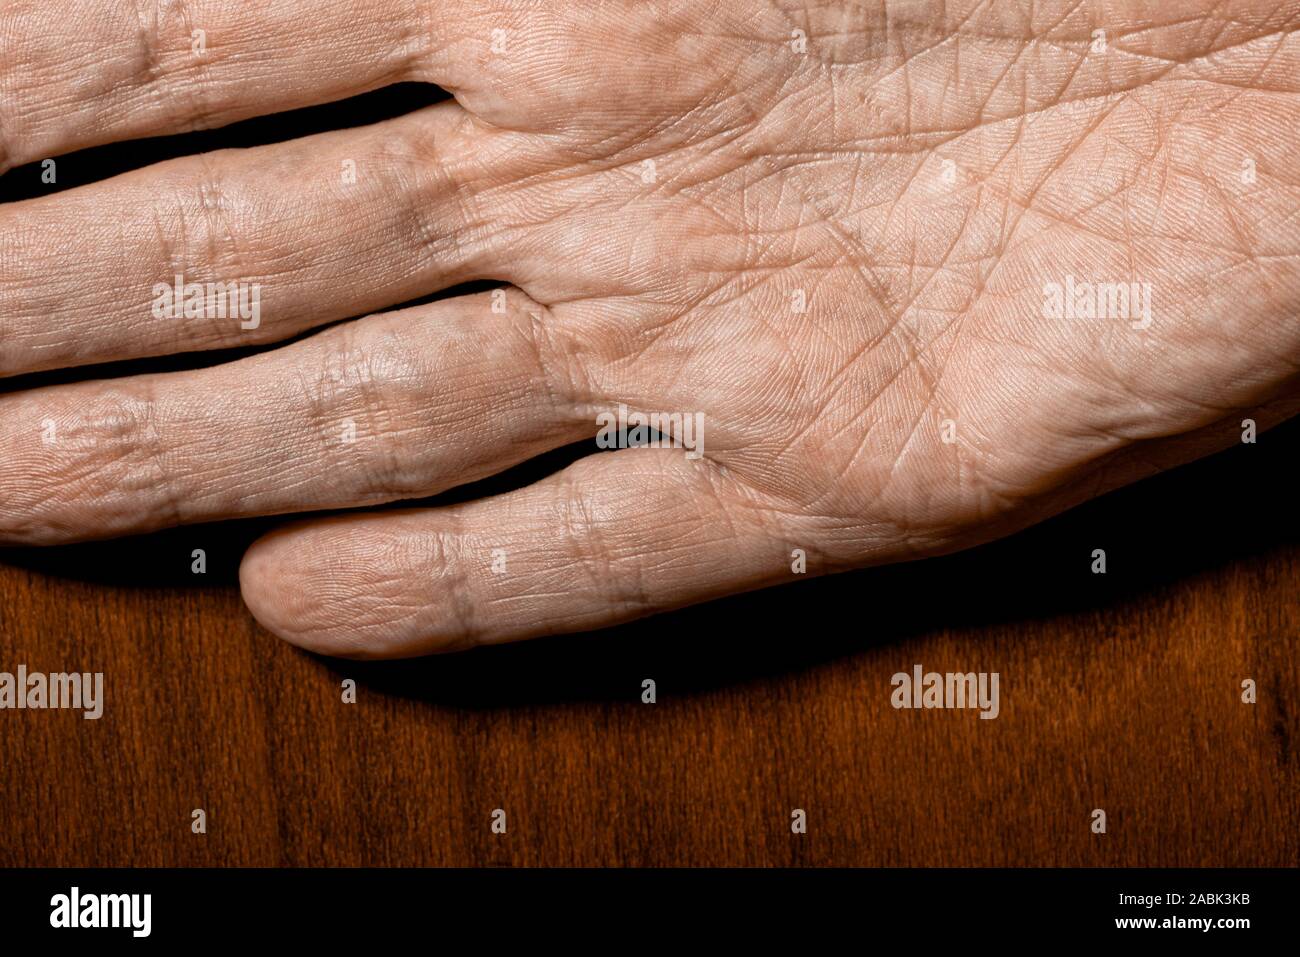 Picture of elderly male hands on a wooden background. Detail of the palm of the hand. Stock Photo